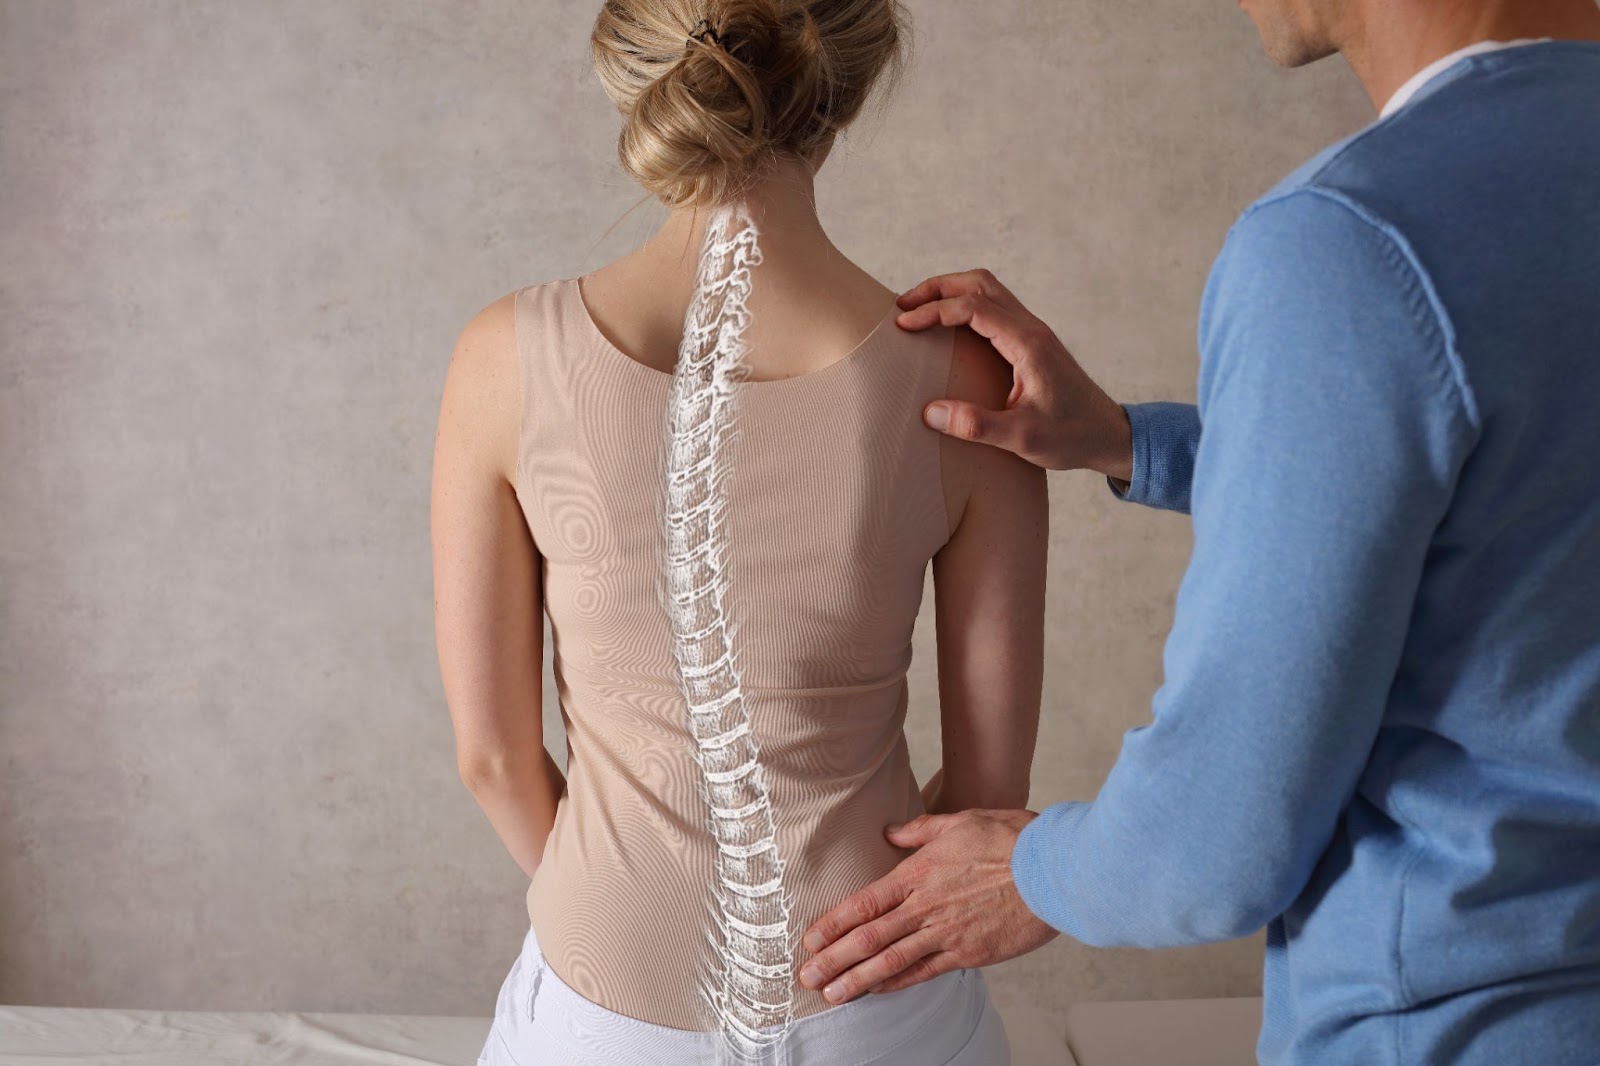 women diagnosed with scoliosis